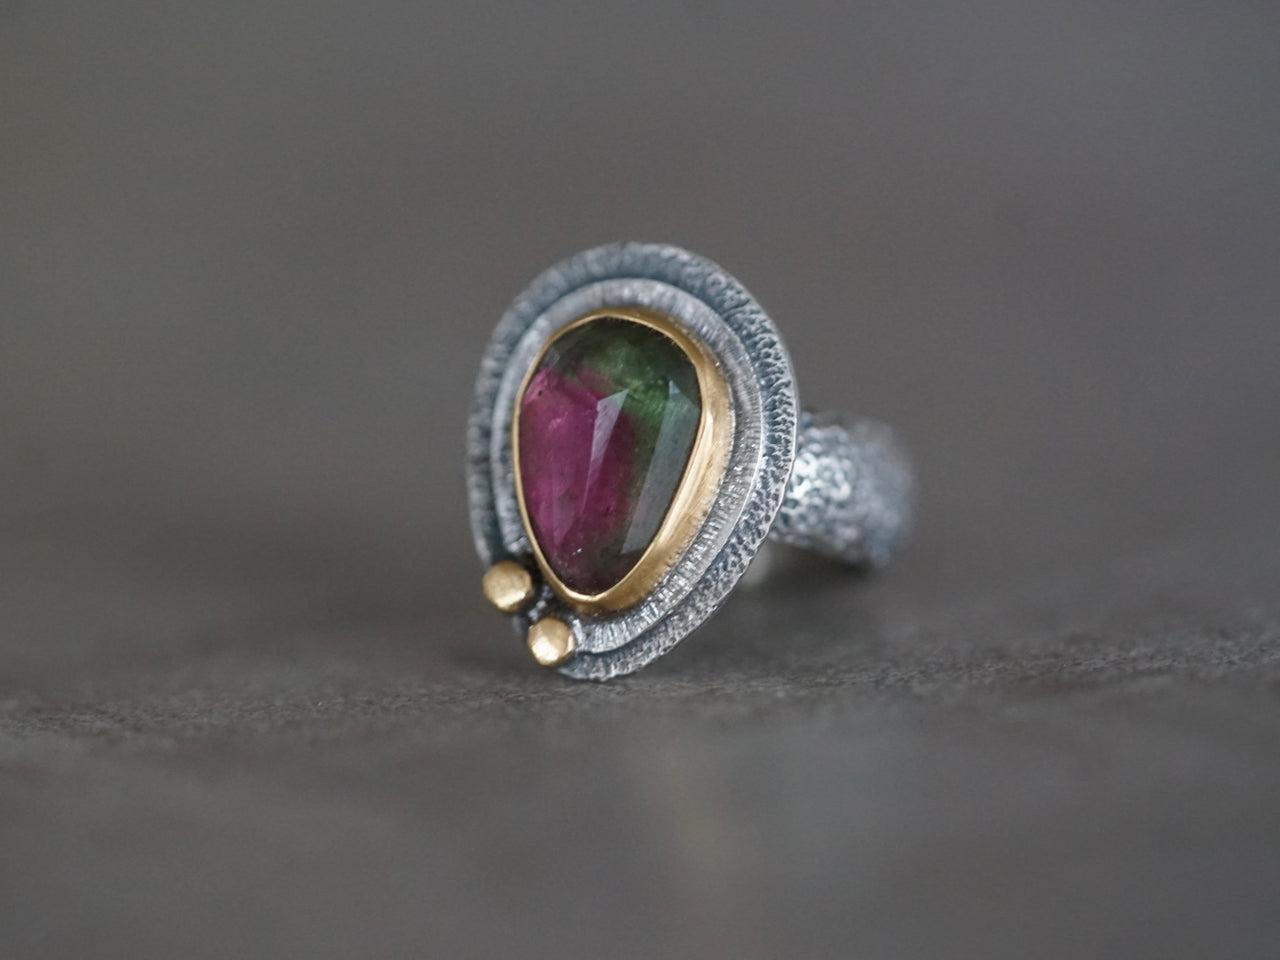 RESERVED bicoloured Tourmaline and 22k gold ring, size 6